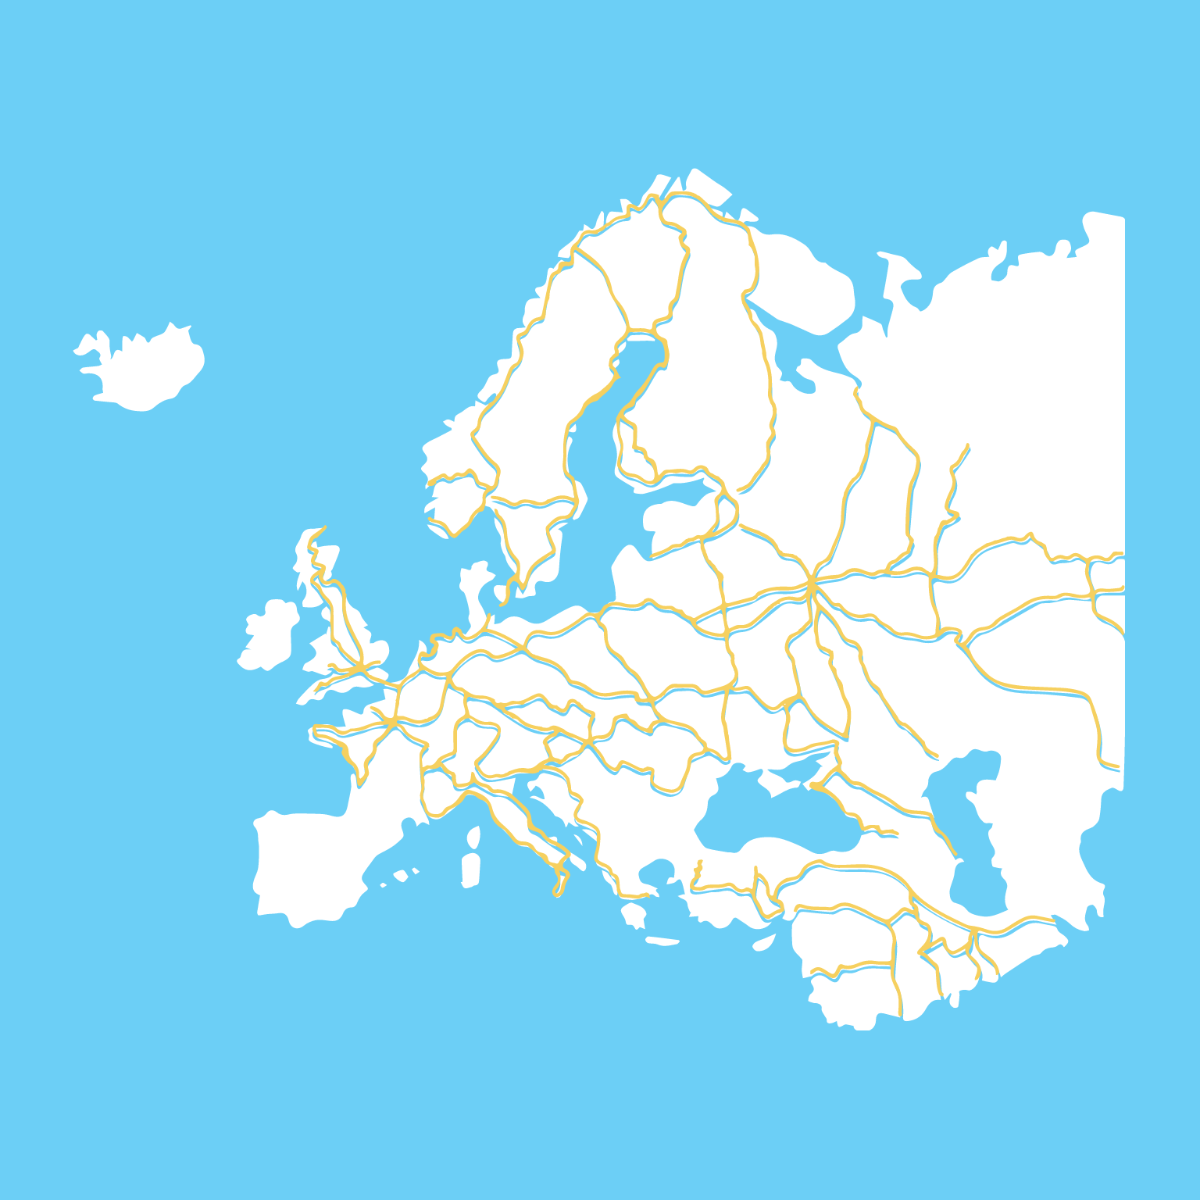 Europe Road Map Vector